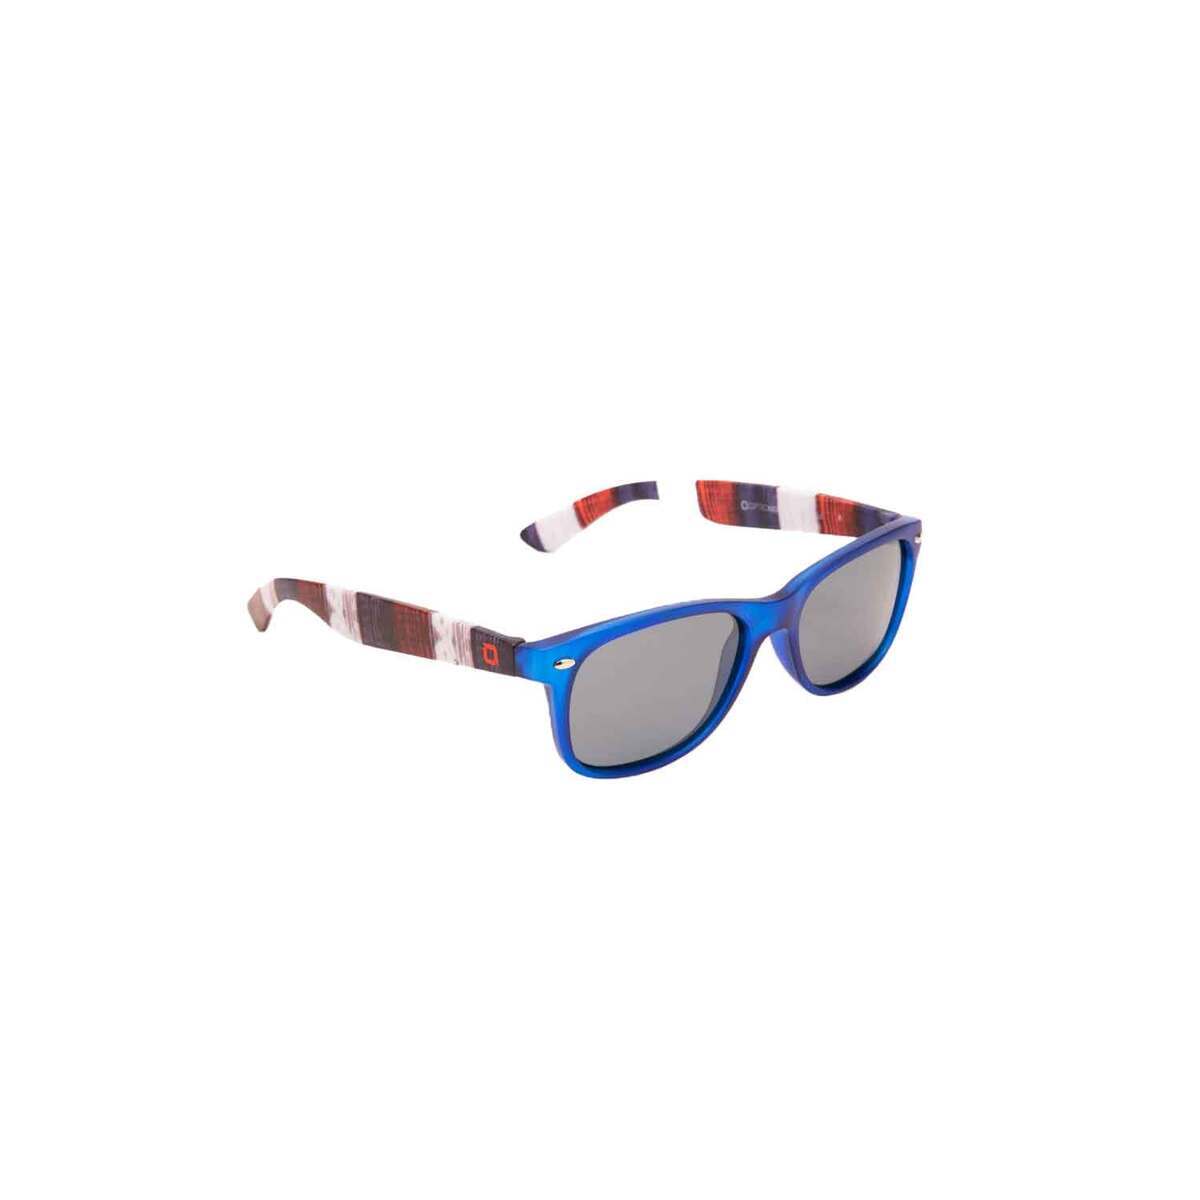 Optic Nerve Cruzin' Americana Polarized Sunglasses - Red, White and Blue/Grey Lens - Red, White and Blue Adult by Sportsman's Warehouse